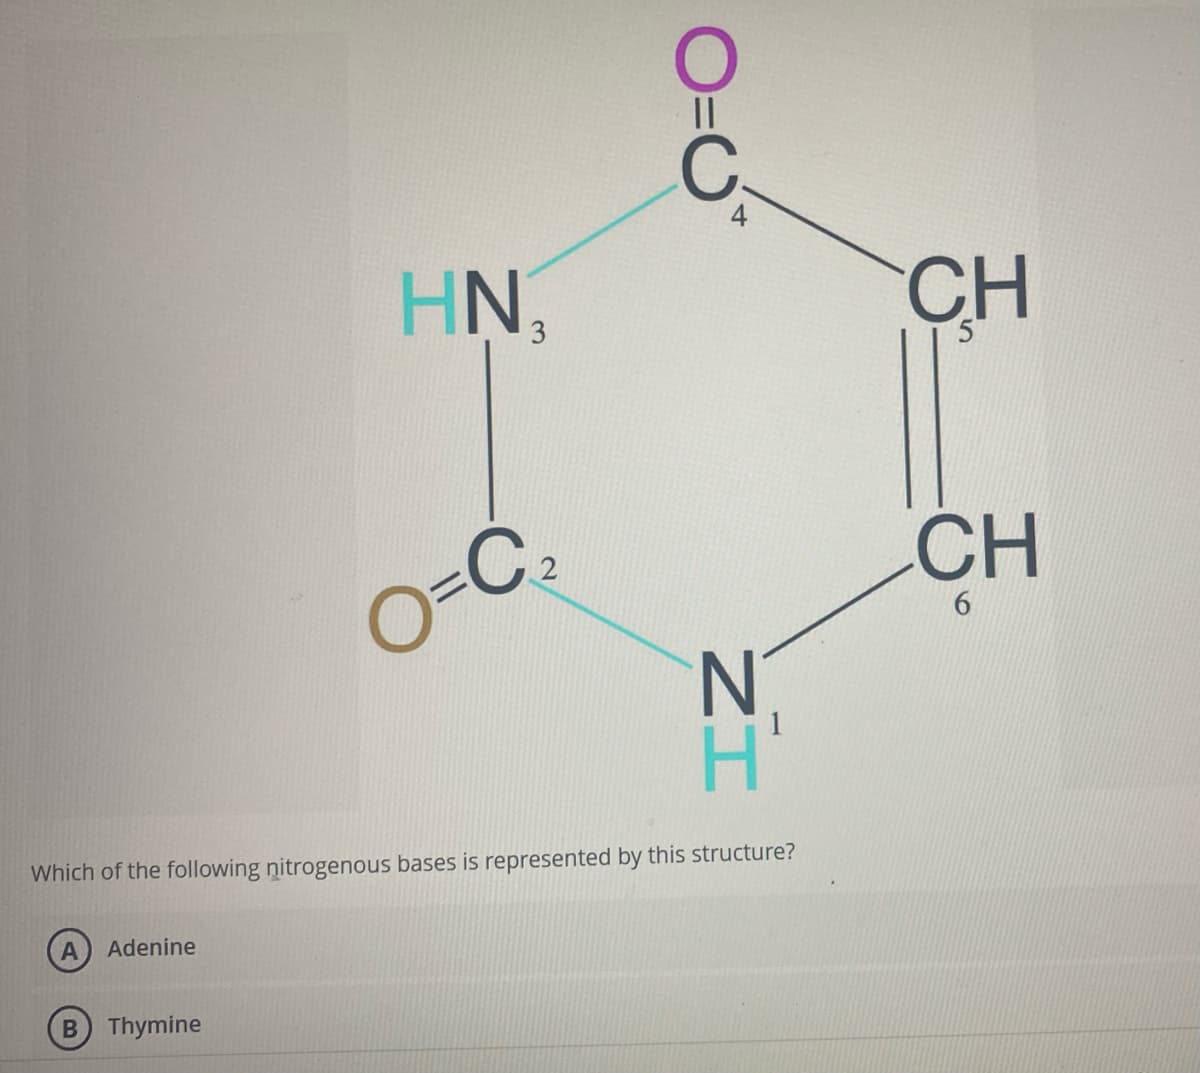 Adenine
HN₁
3
B) Thymine
O=C₂
O=0*
N
Which of the following nitrogenous bases is represented by this structure?
IZ
CH
CH
6